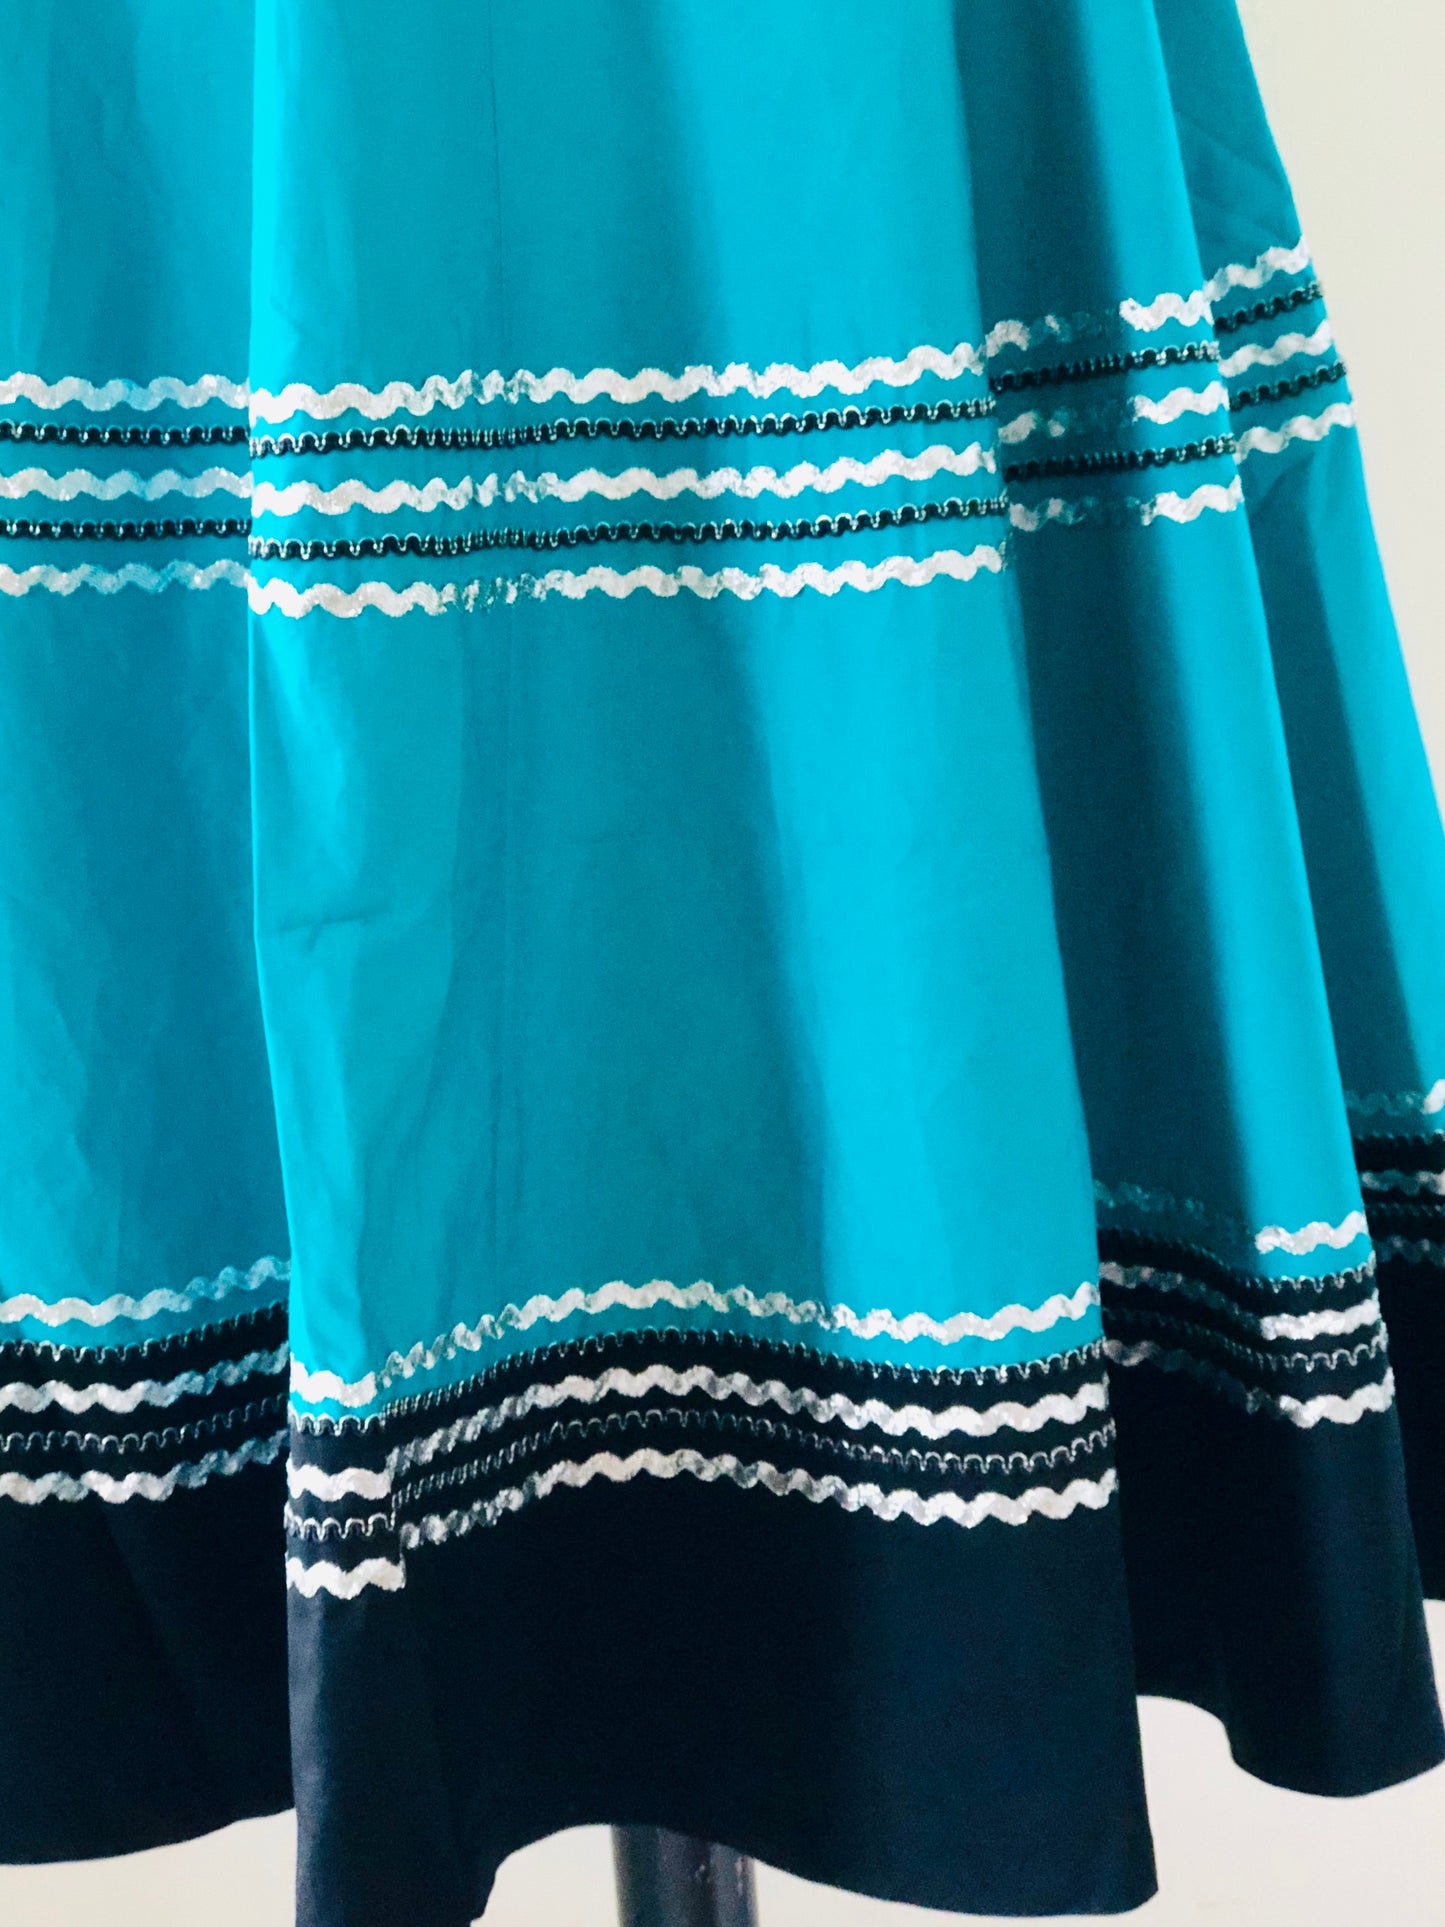 Vintage Patio Mexican full circle dress in turquoise and black XS to 2XL